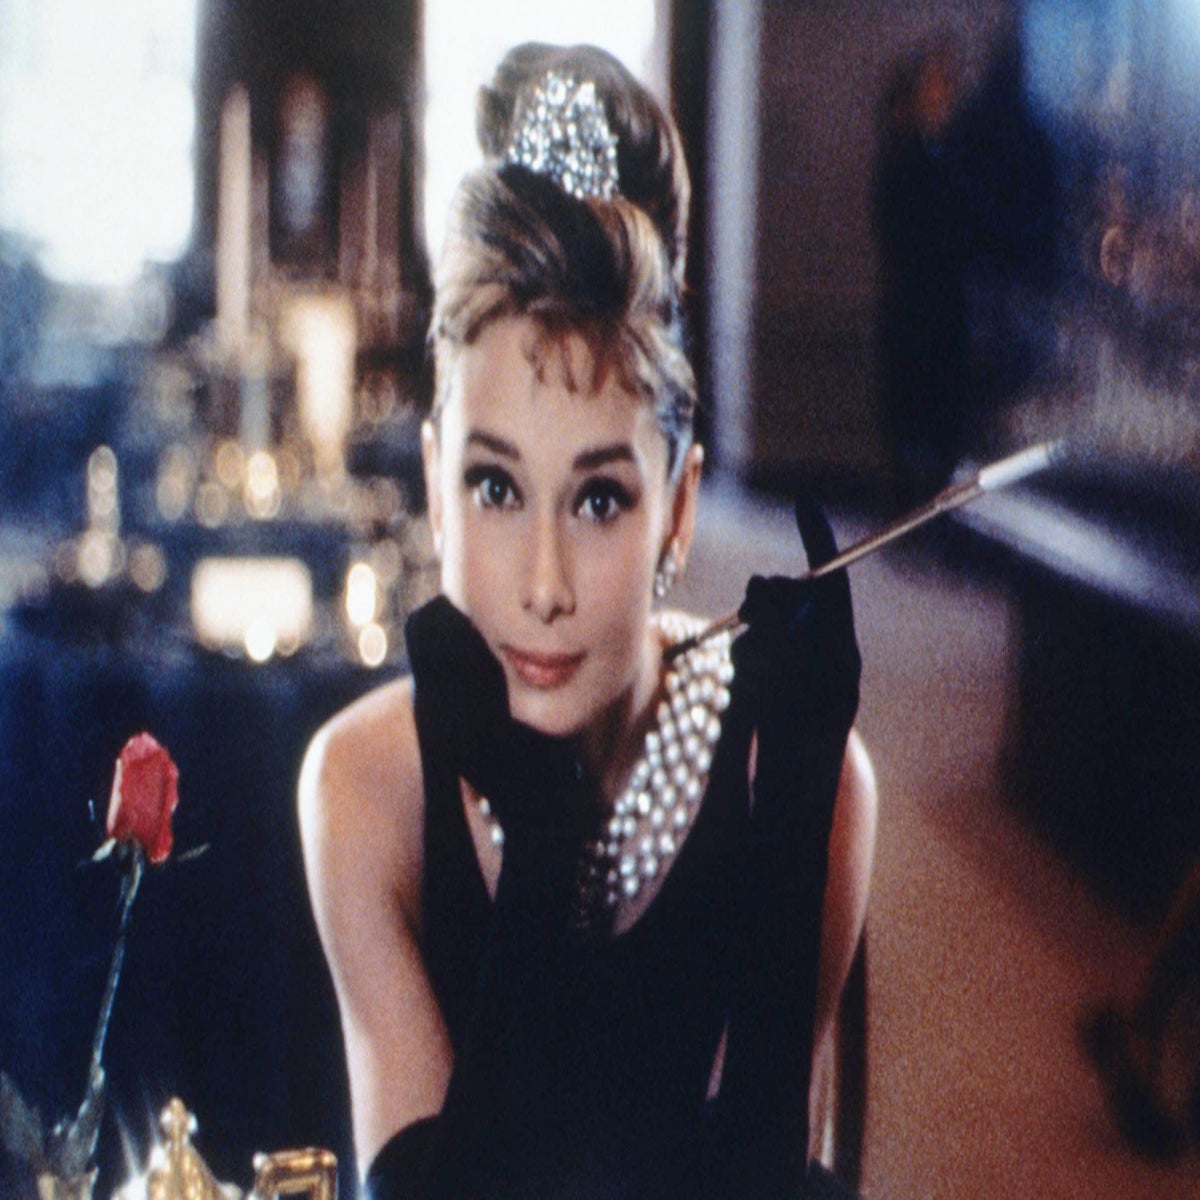 You Can Now Stay in 'Breakfast at Tiffany's' Iconic Manhattan Brownstone